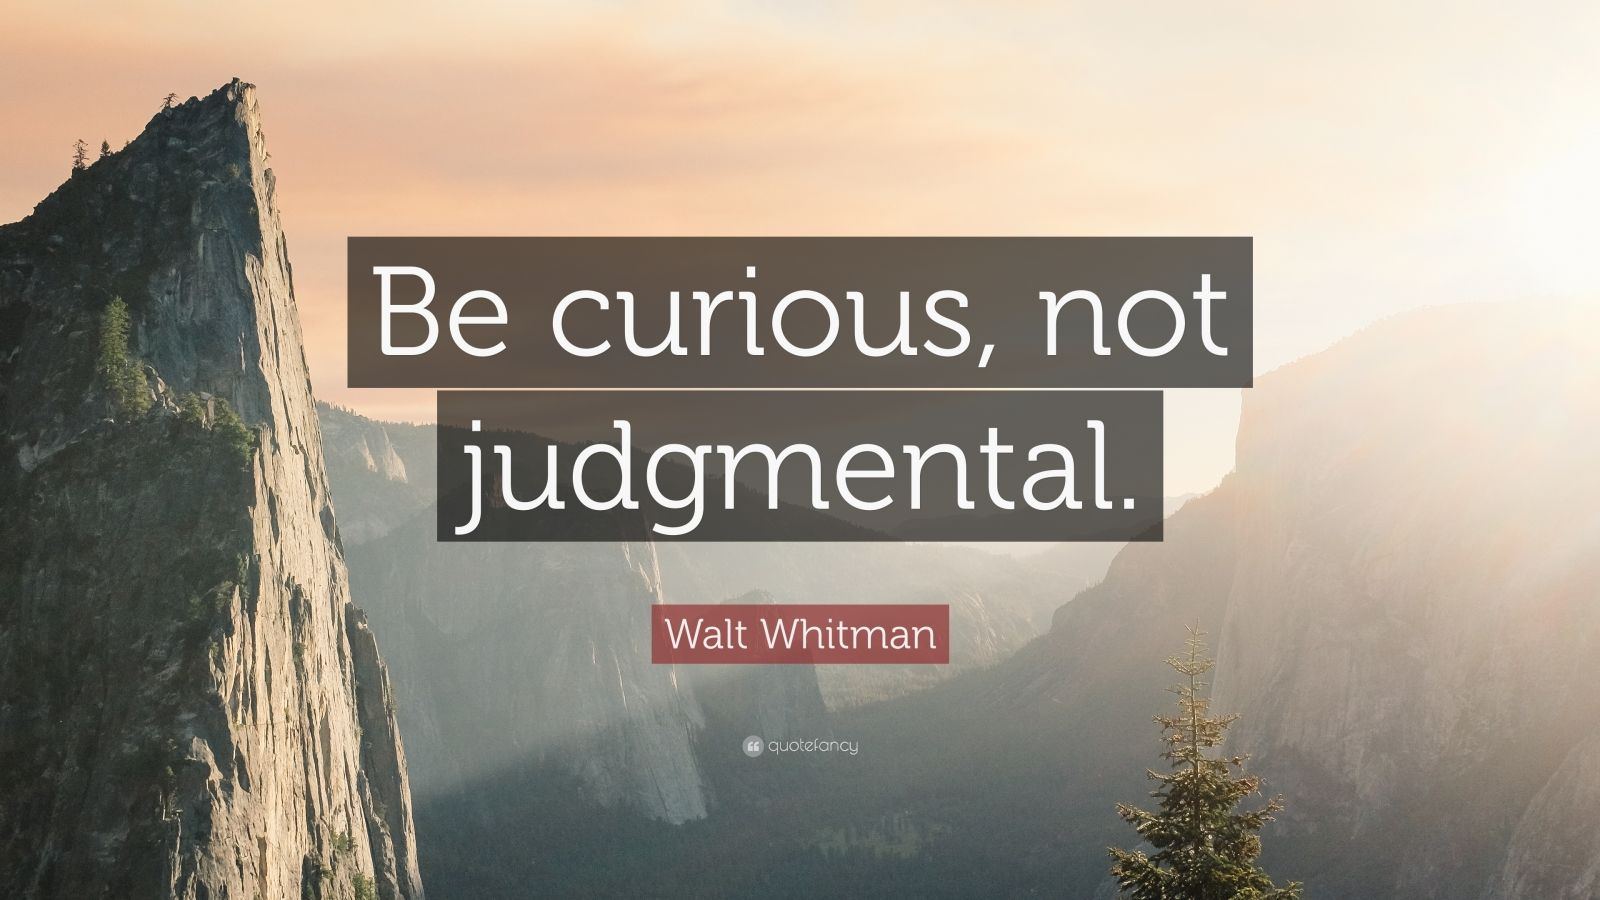 4685397 Walt Whitman Quote Be curious not judgmental